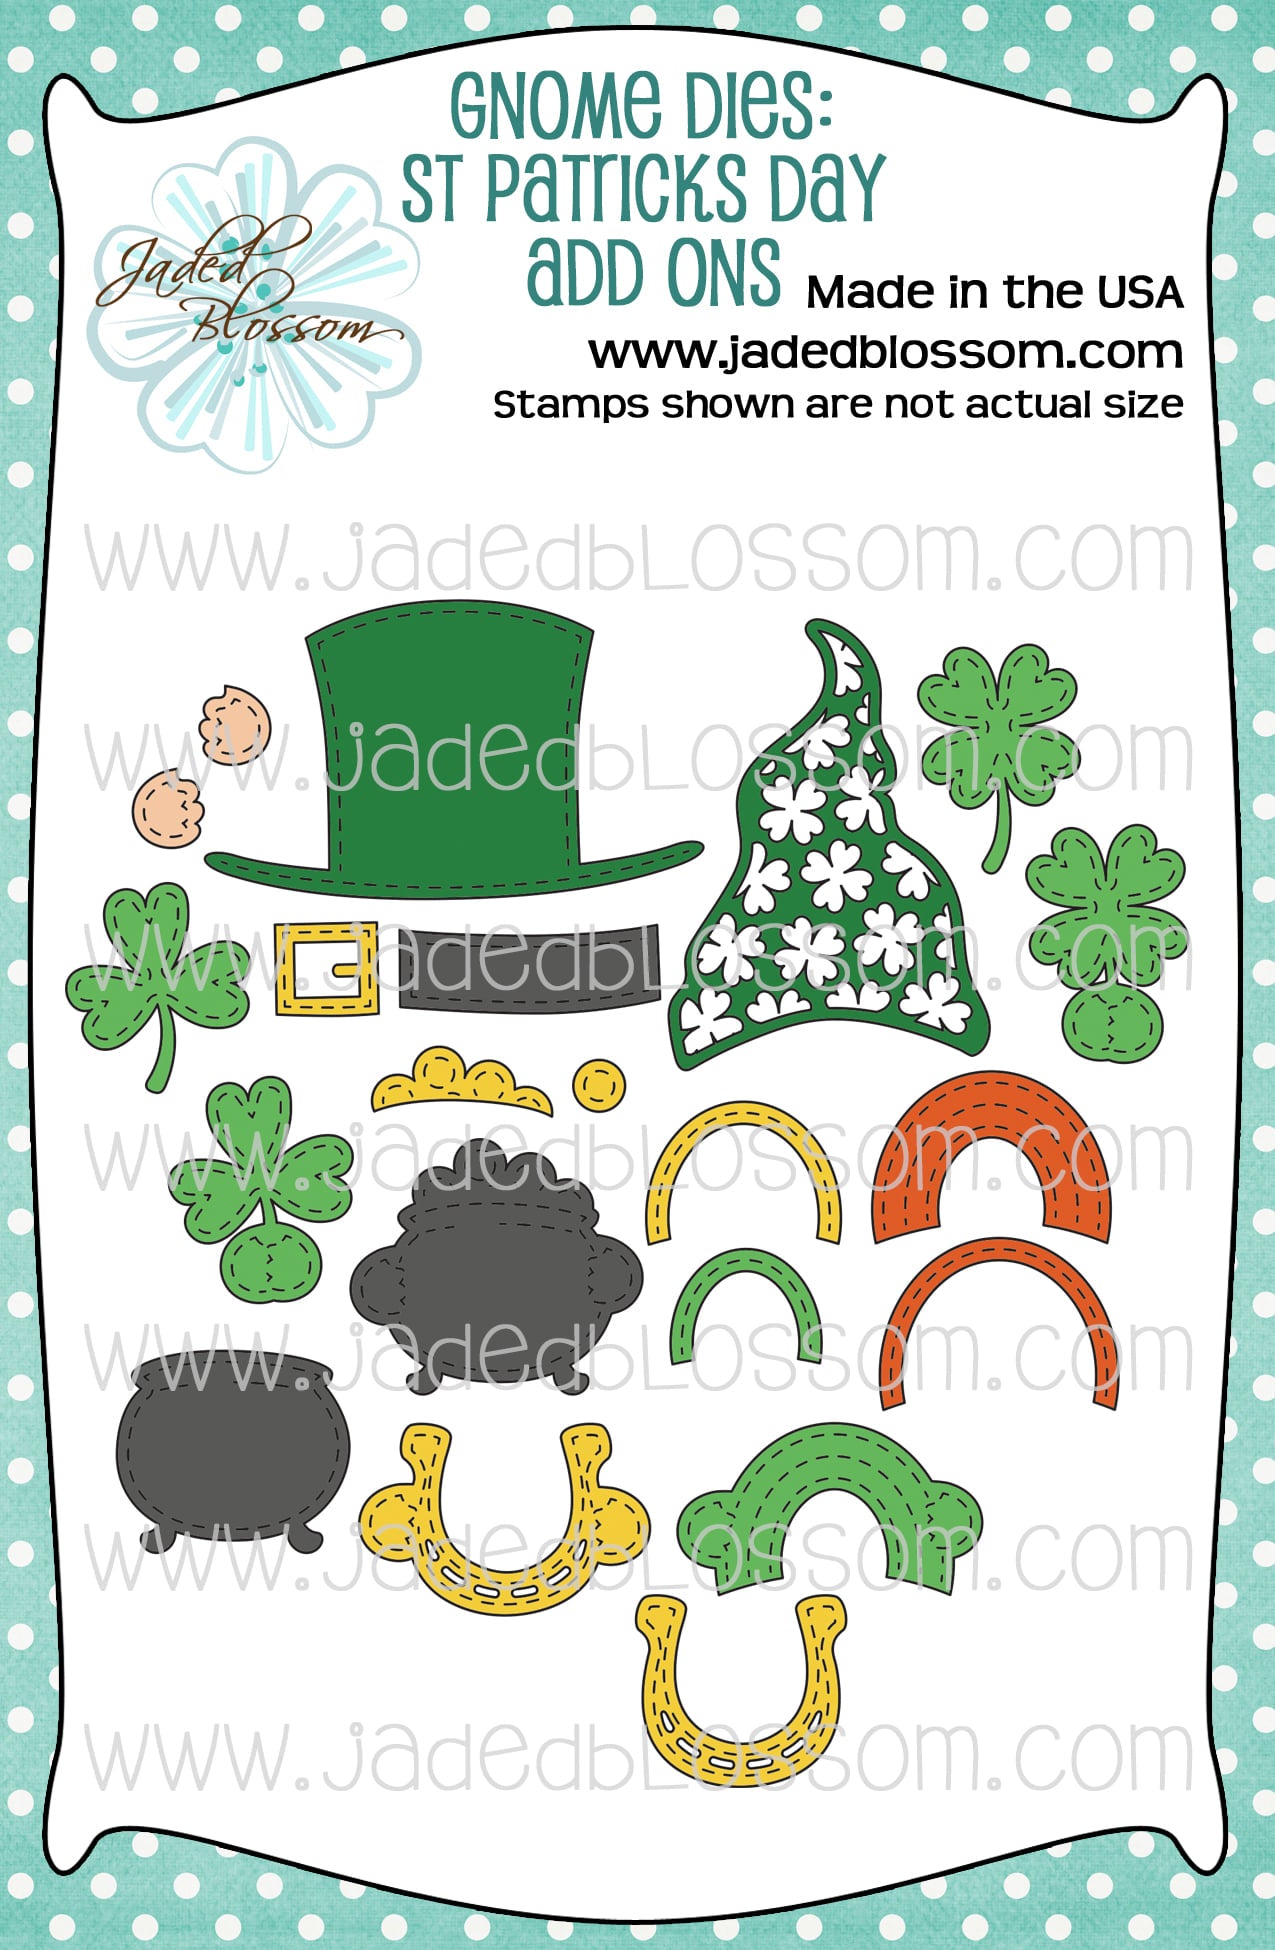 Gnome Dies: St Patrick's Day Add Ons